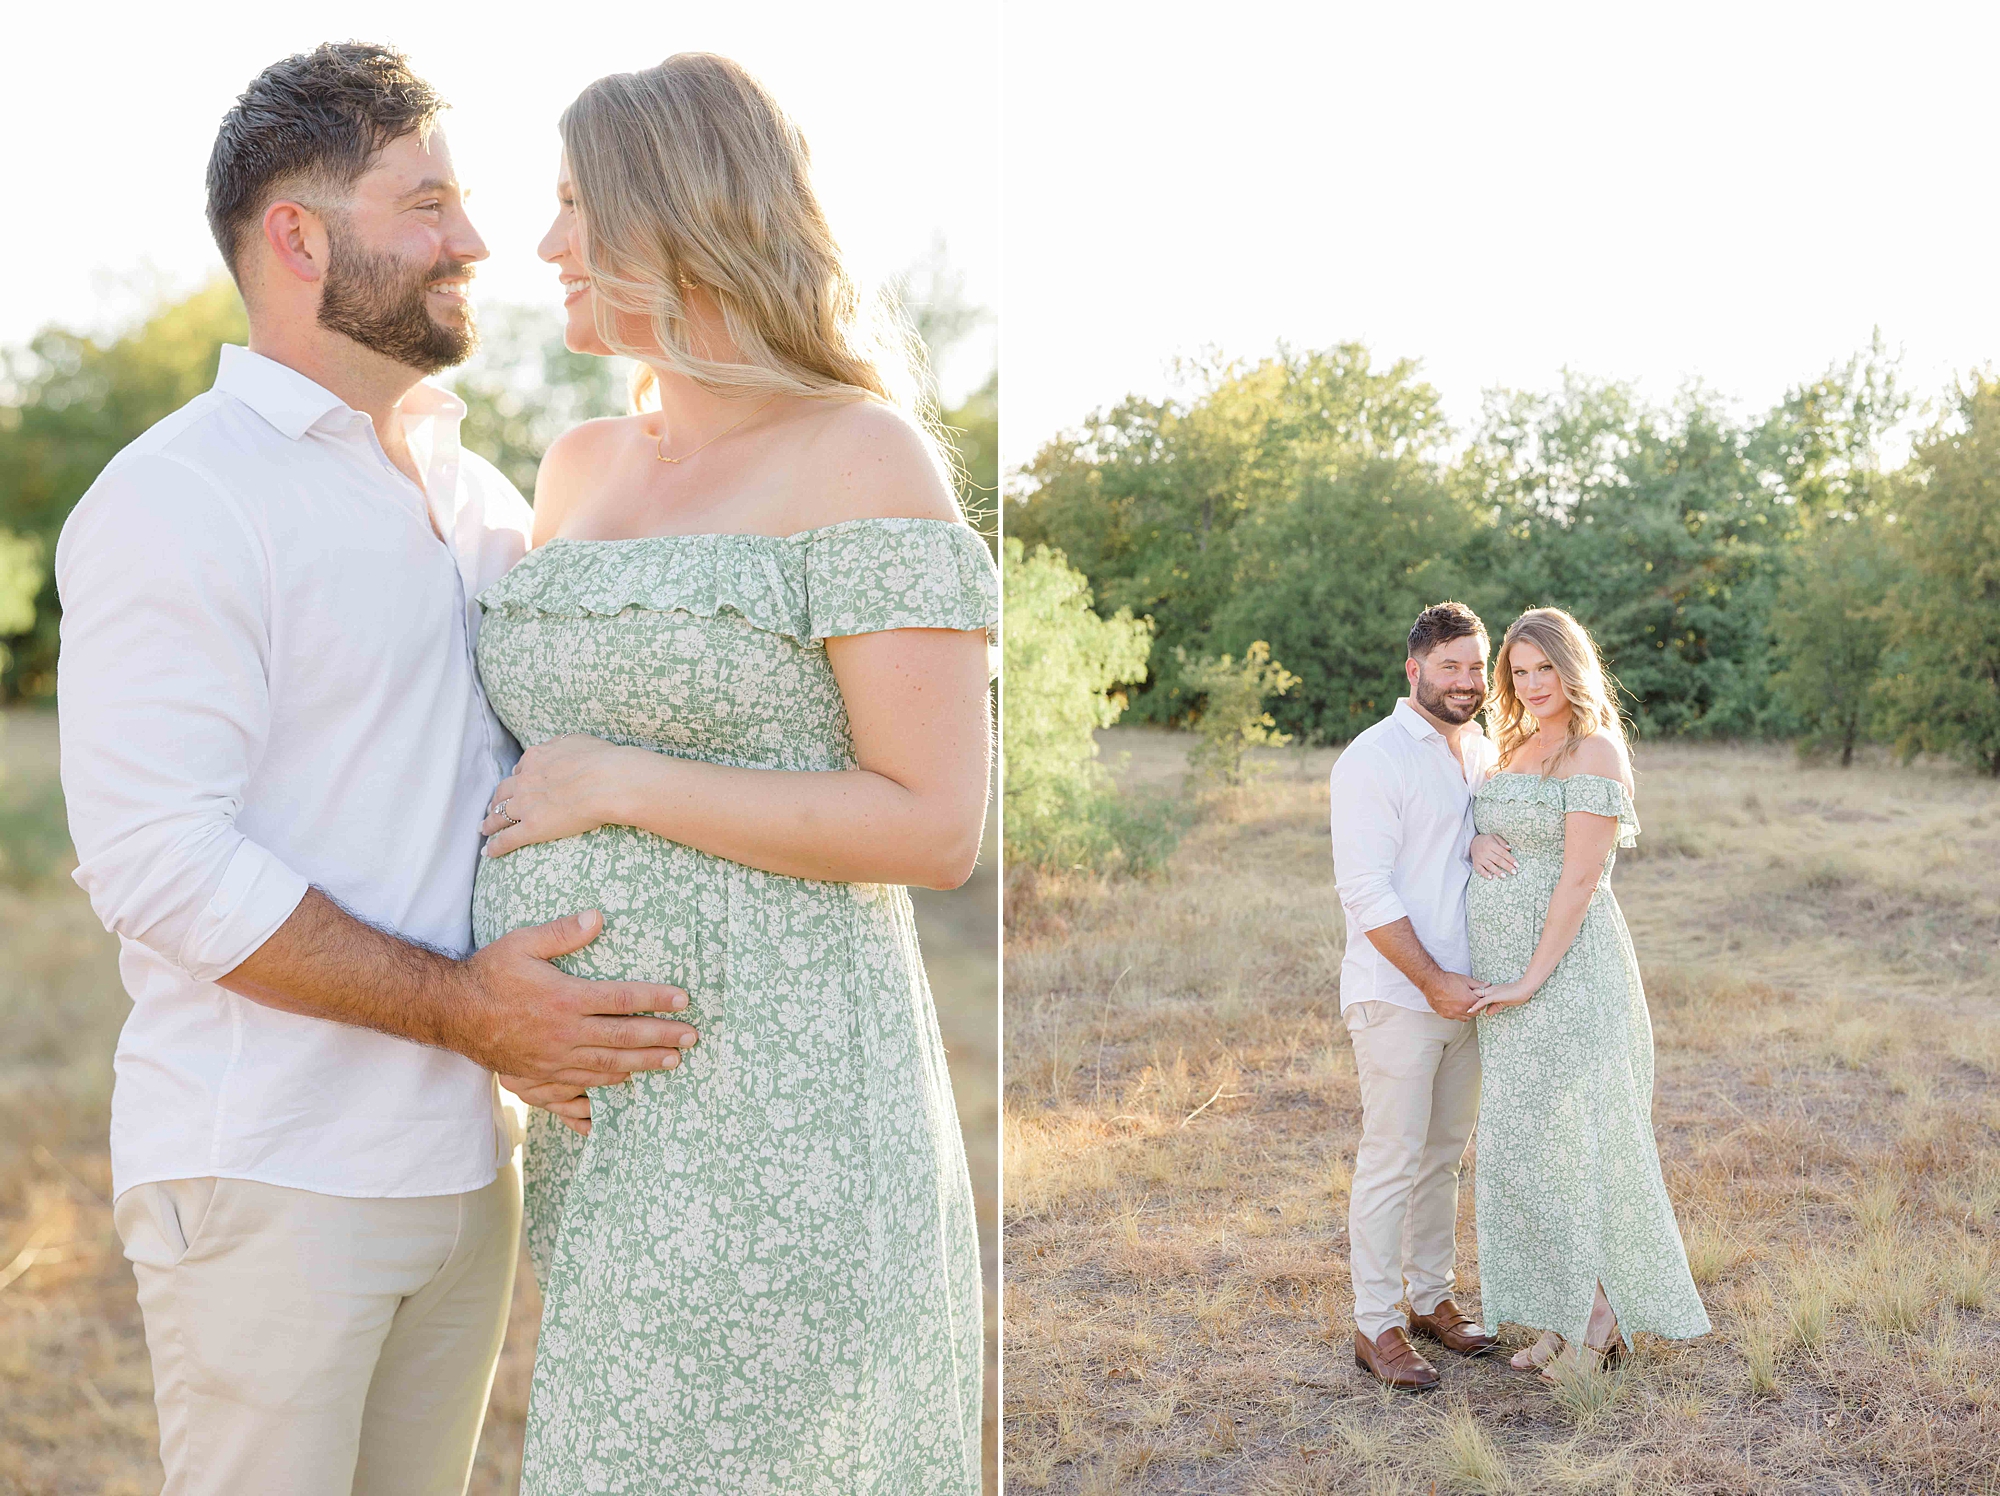 man smiles at wife during maternity portraits in field at sunset